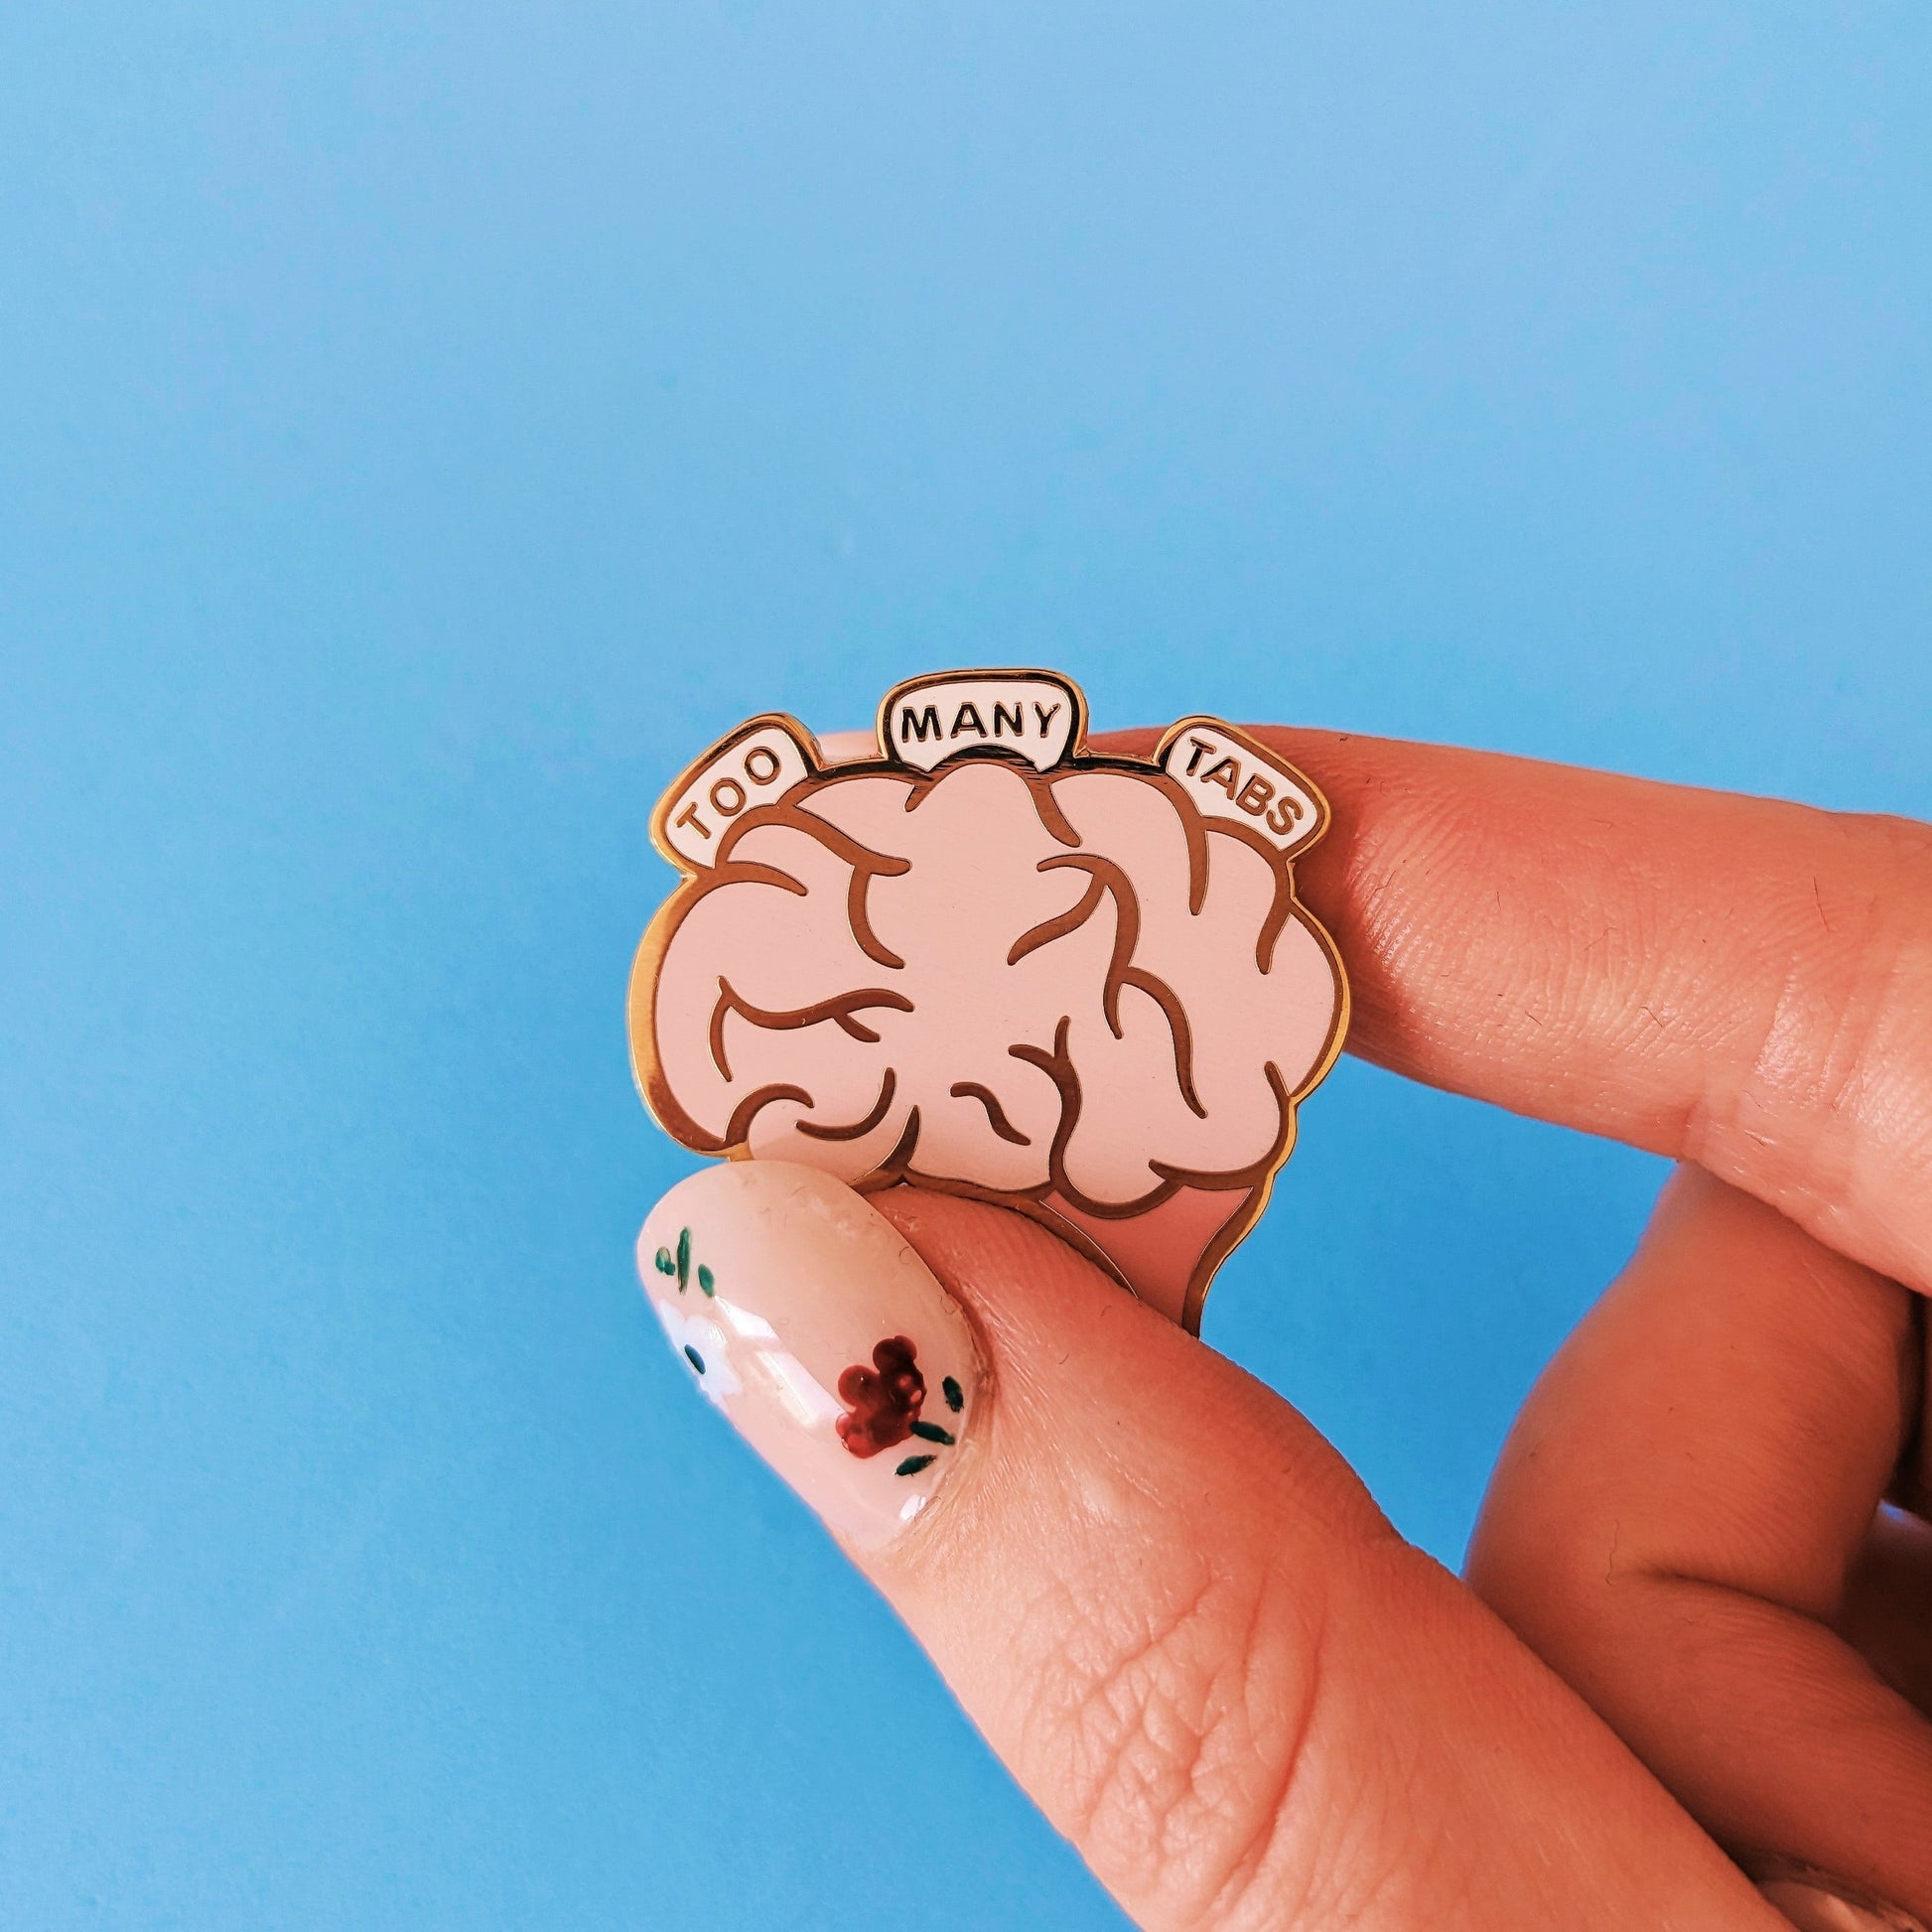 A great gift for students/a mental health gift. This enamel pin badge has been a popular adhd pin.